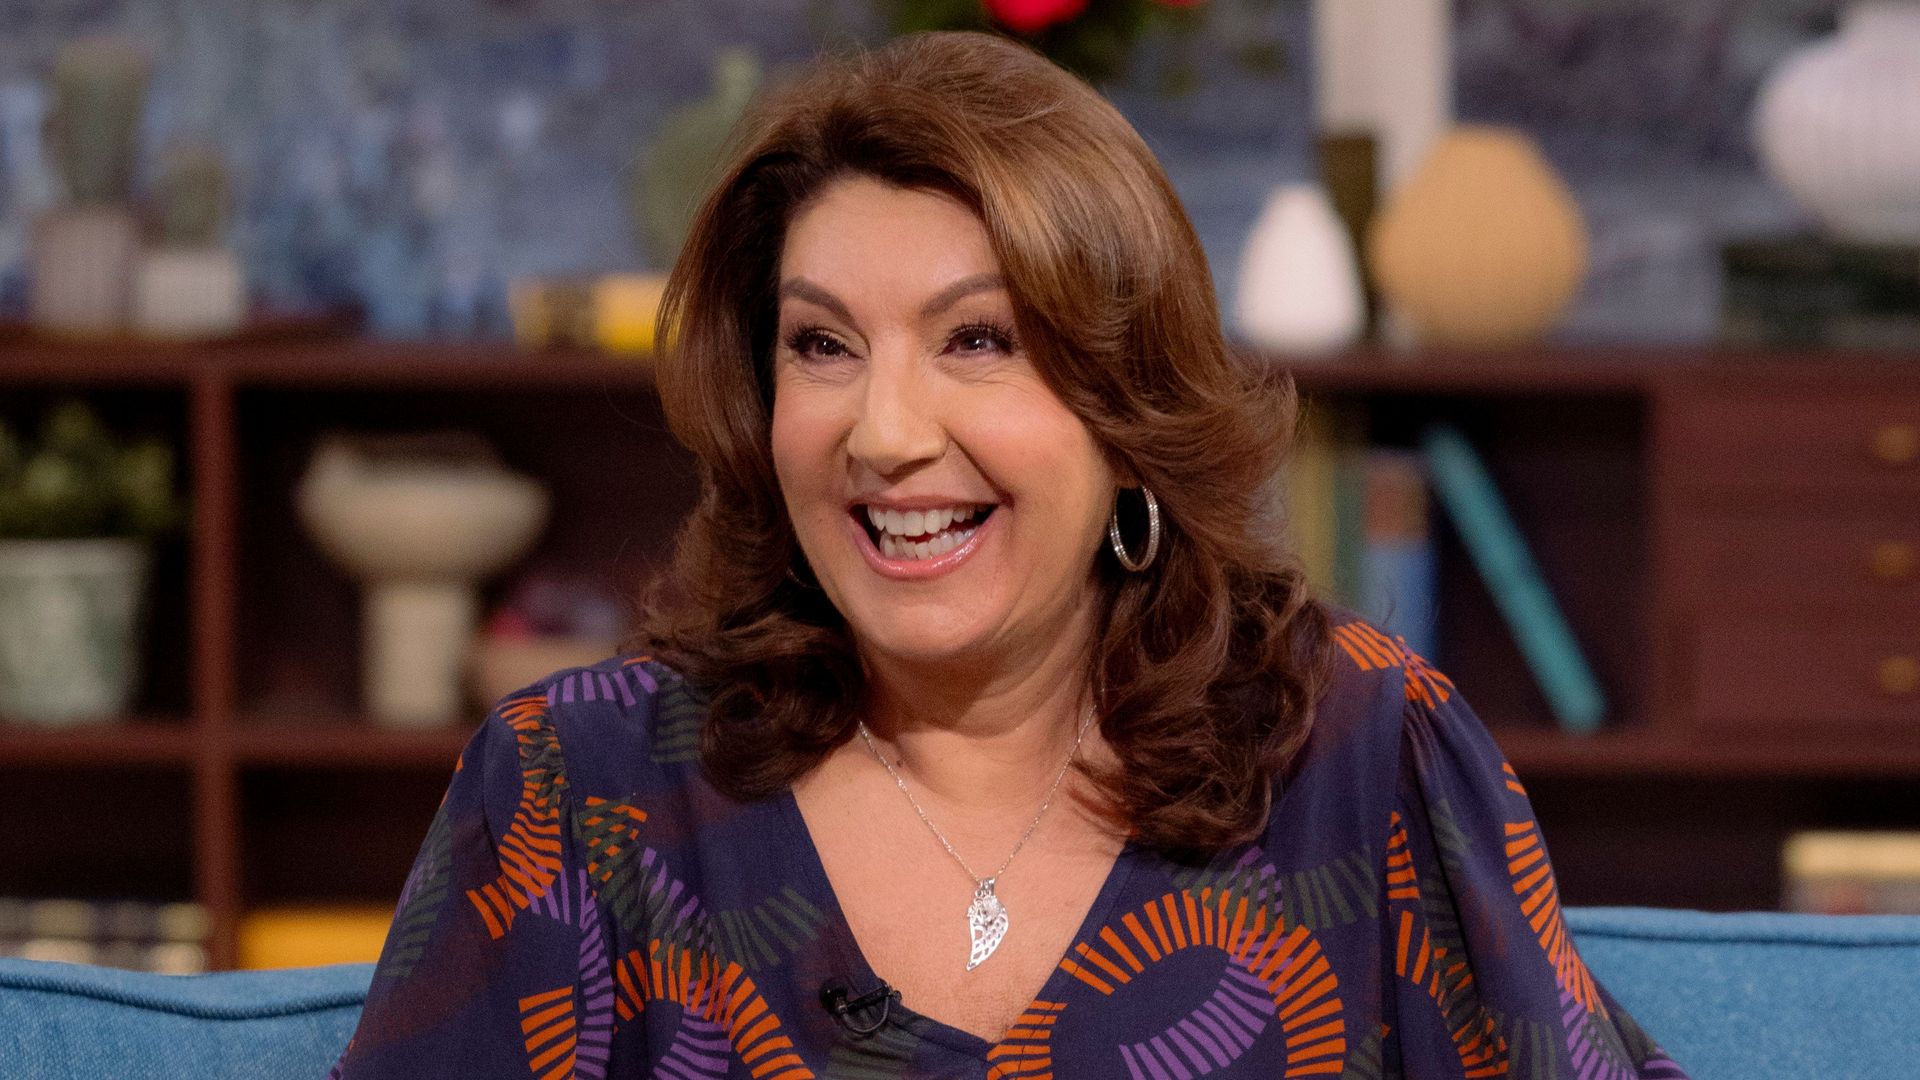 Jane McDonald in a purple outfit